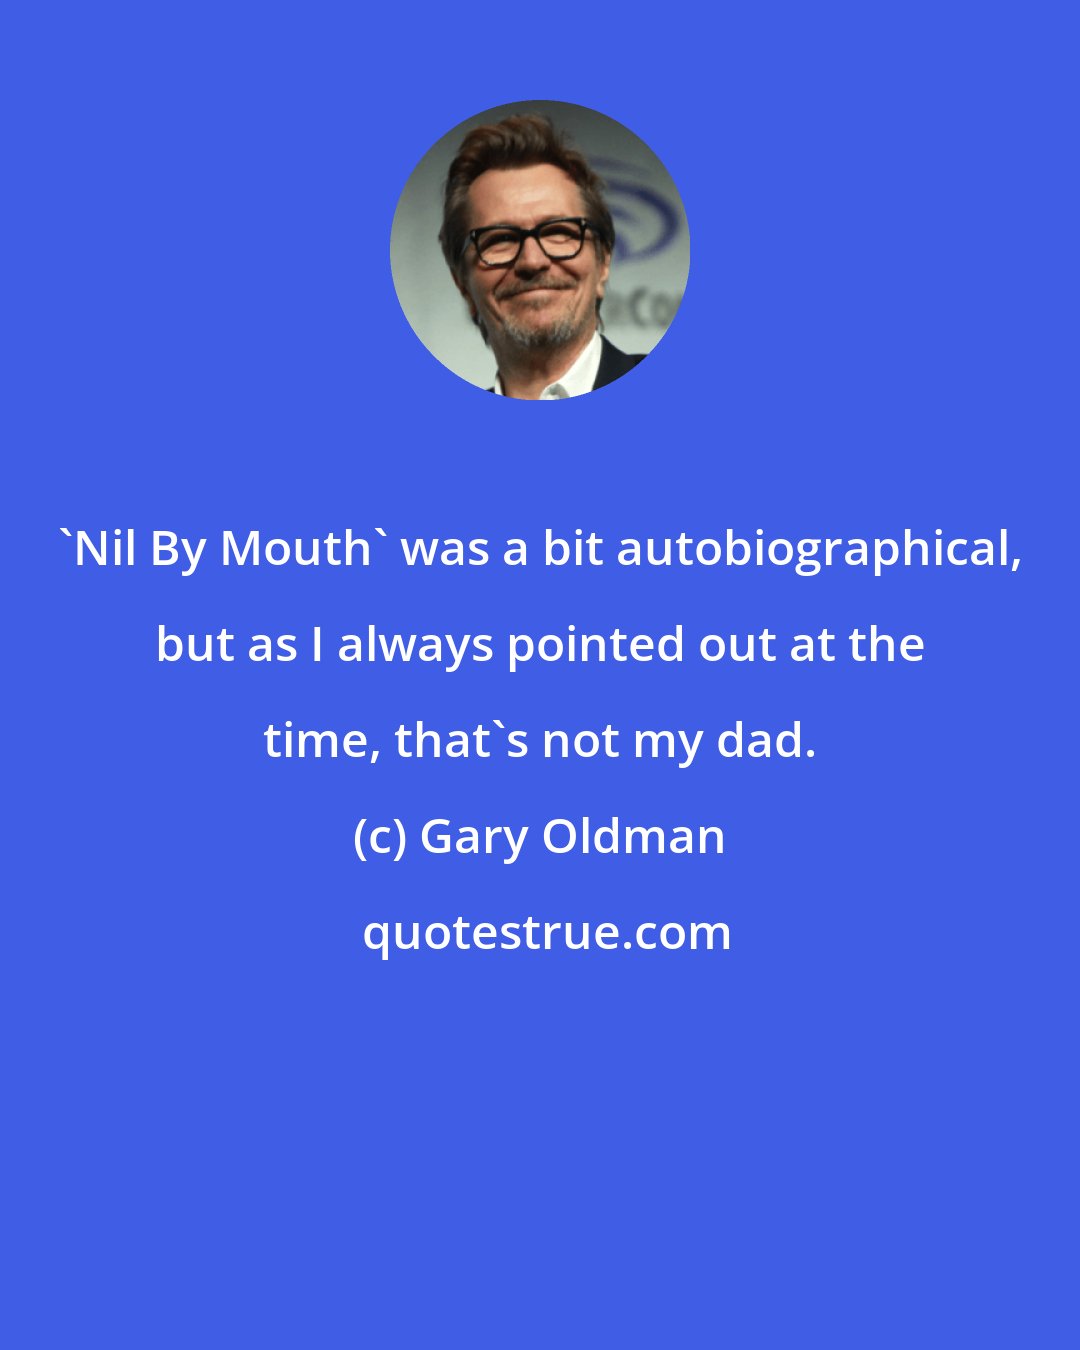 Gary Oldman: 'Nil By Mouth' was a bit autobiographical, but as I always pointed out at the time, that's not my dad.